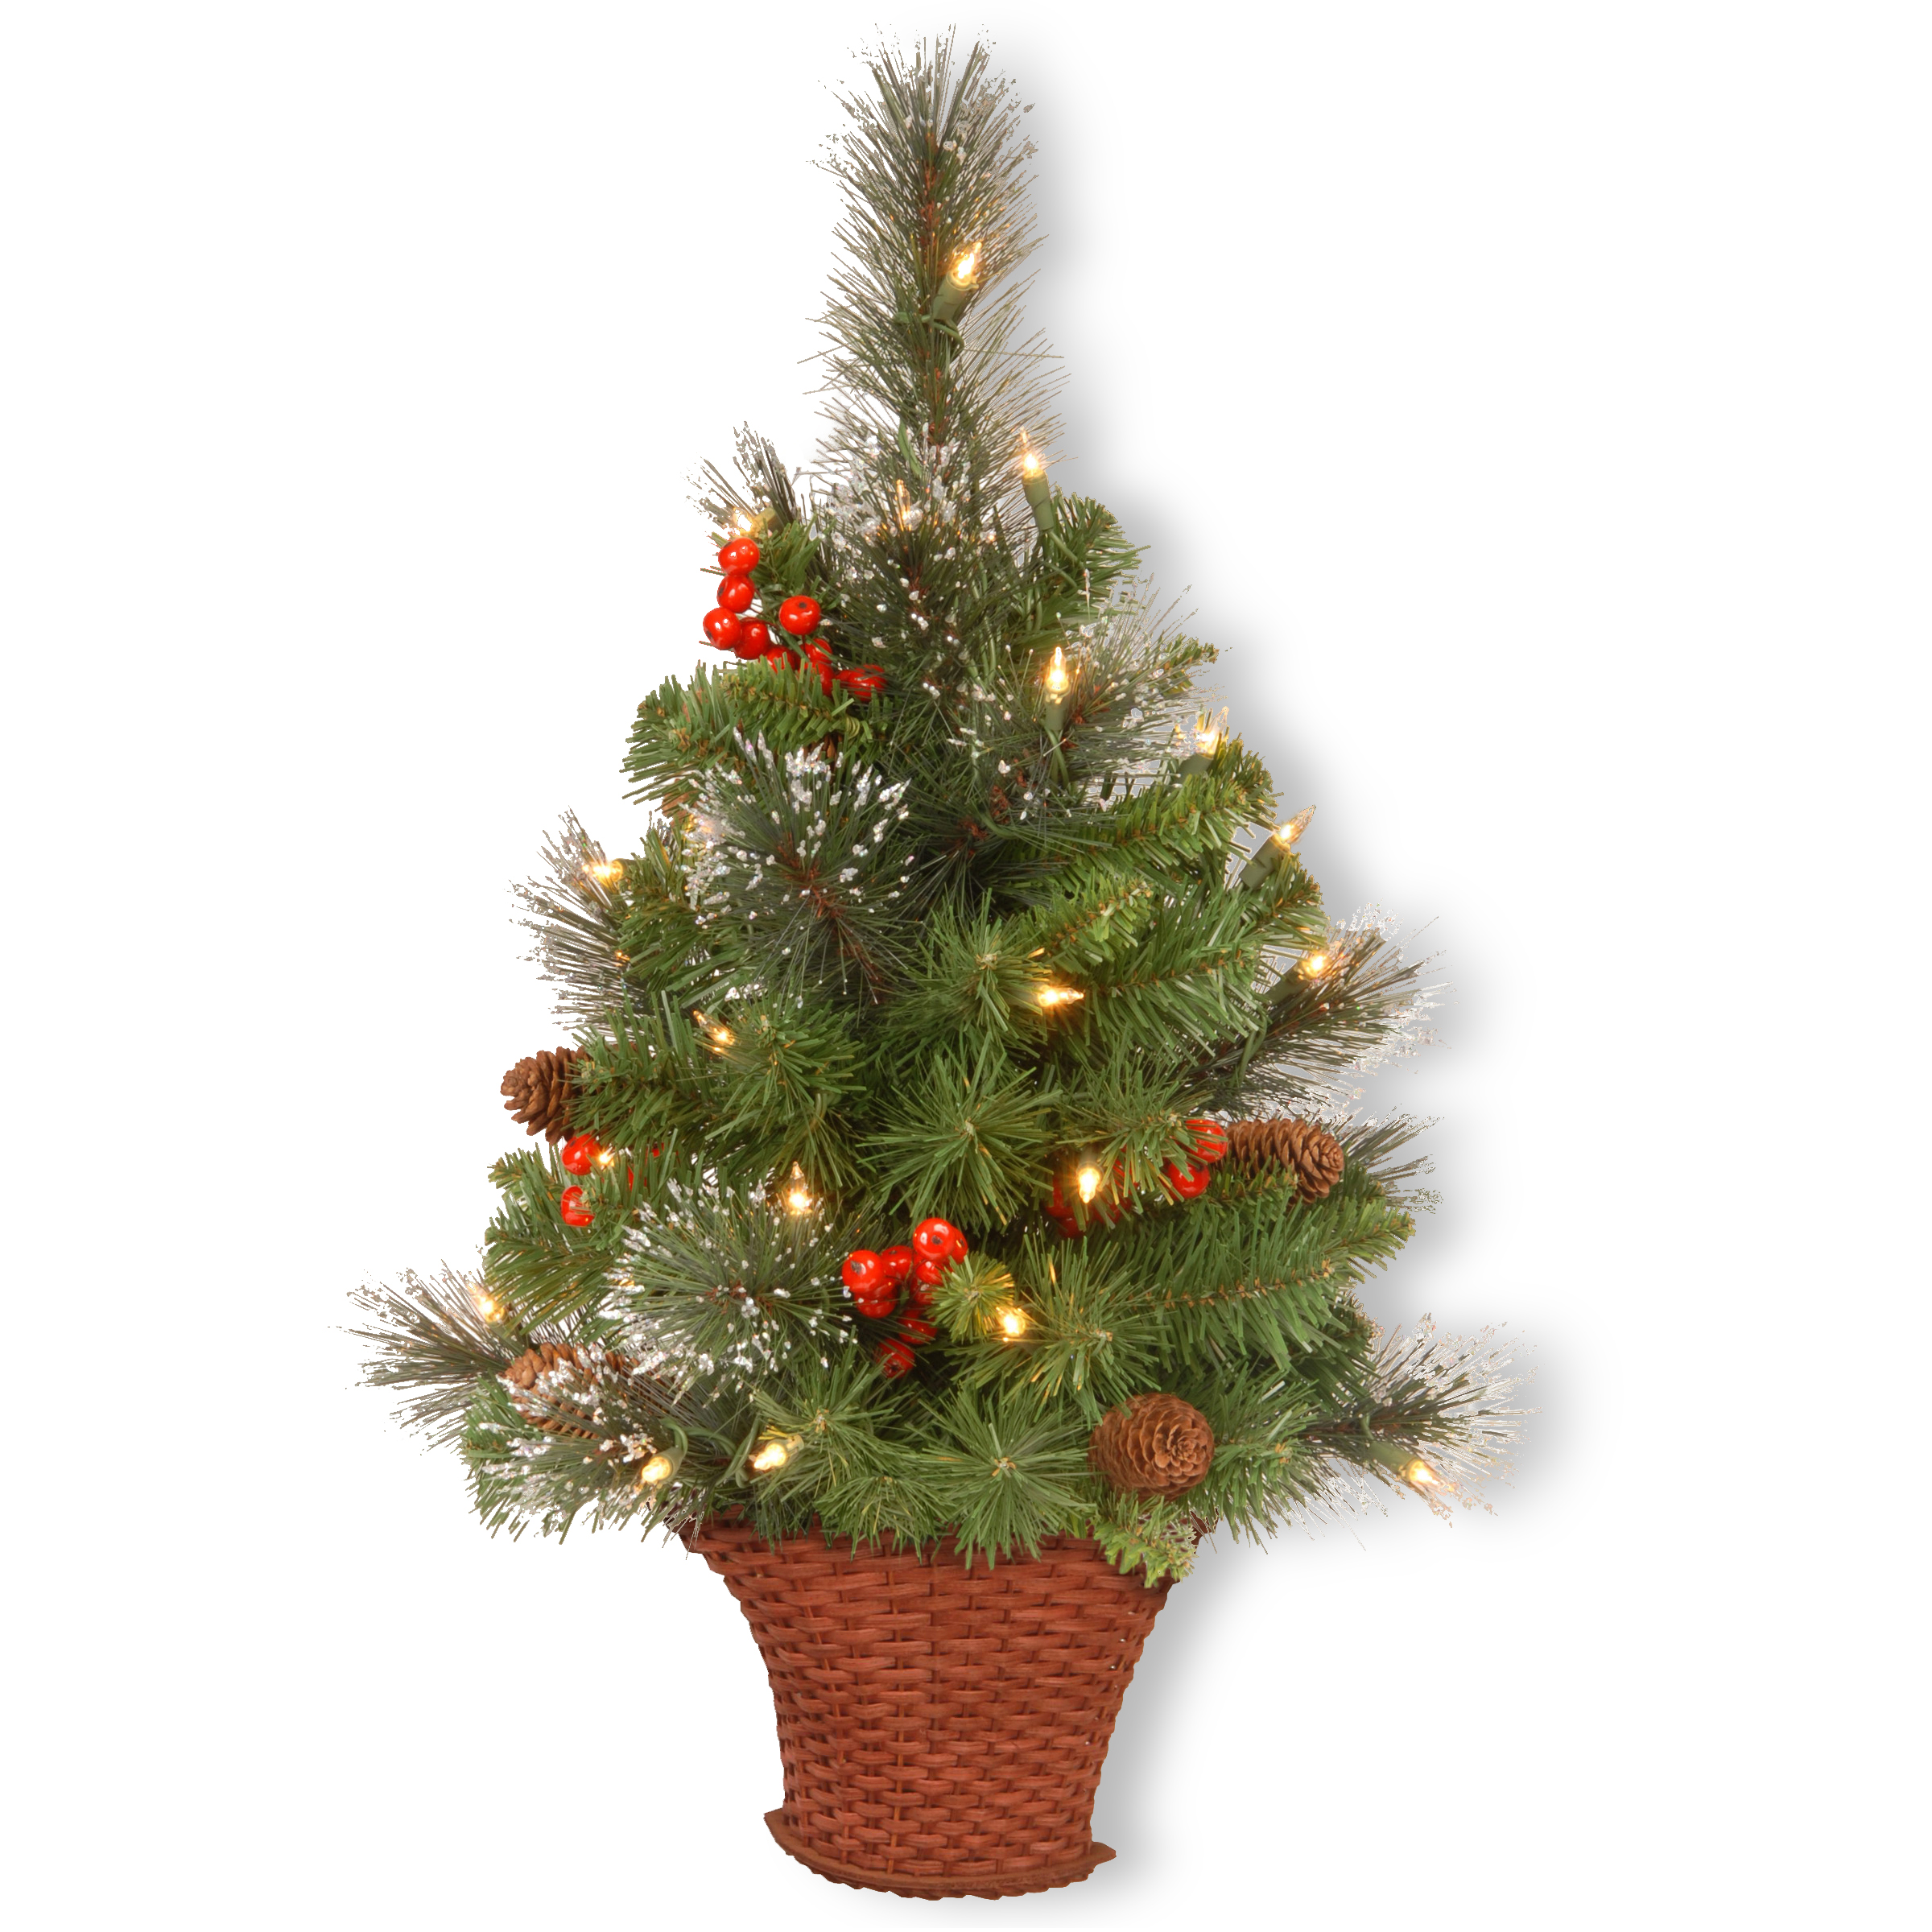 National Tree Company Pre-Lit Artificial Mini Christmas Tree, Green, Crestwood Spruce, White Lights, Decorated with Pine Cones, Berry Clusters, Frosted Branches, Includes Wicker Base, 3 Feet - image 1 of 5